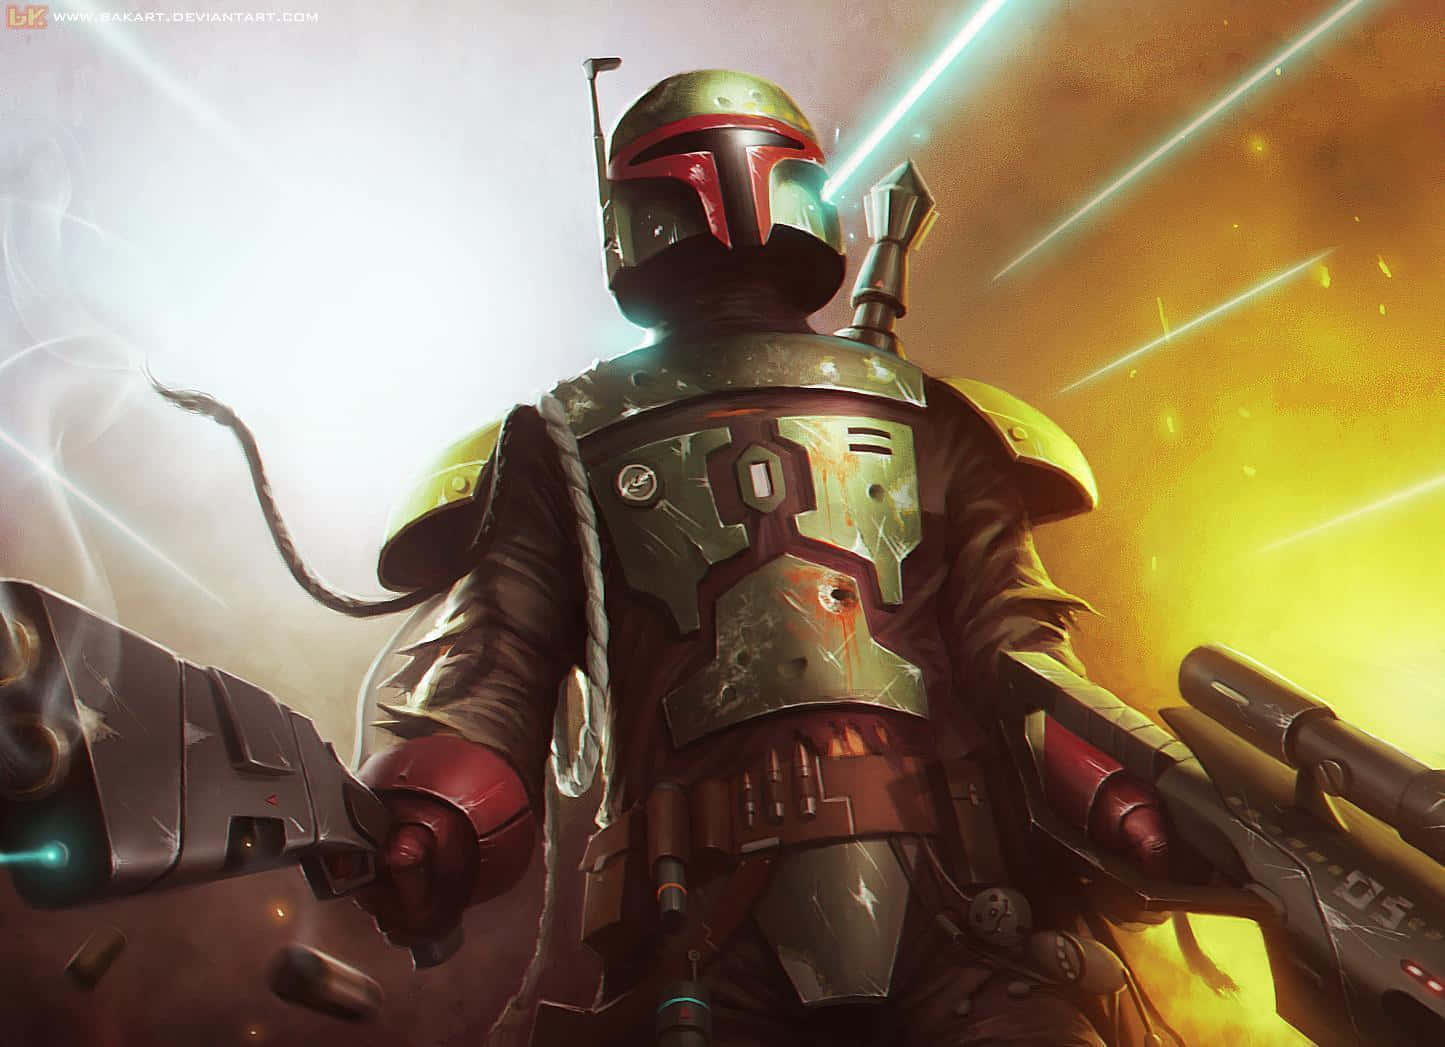 Boba Fett standing triumphantly with a flame-throwing weapon